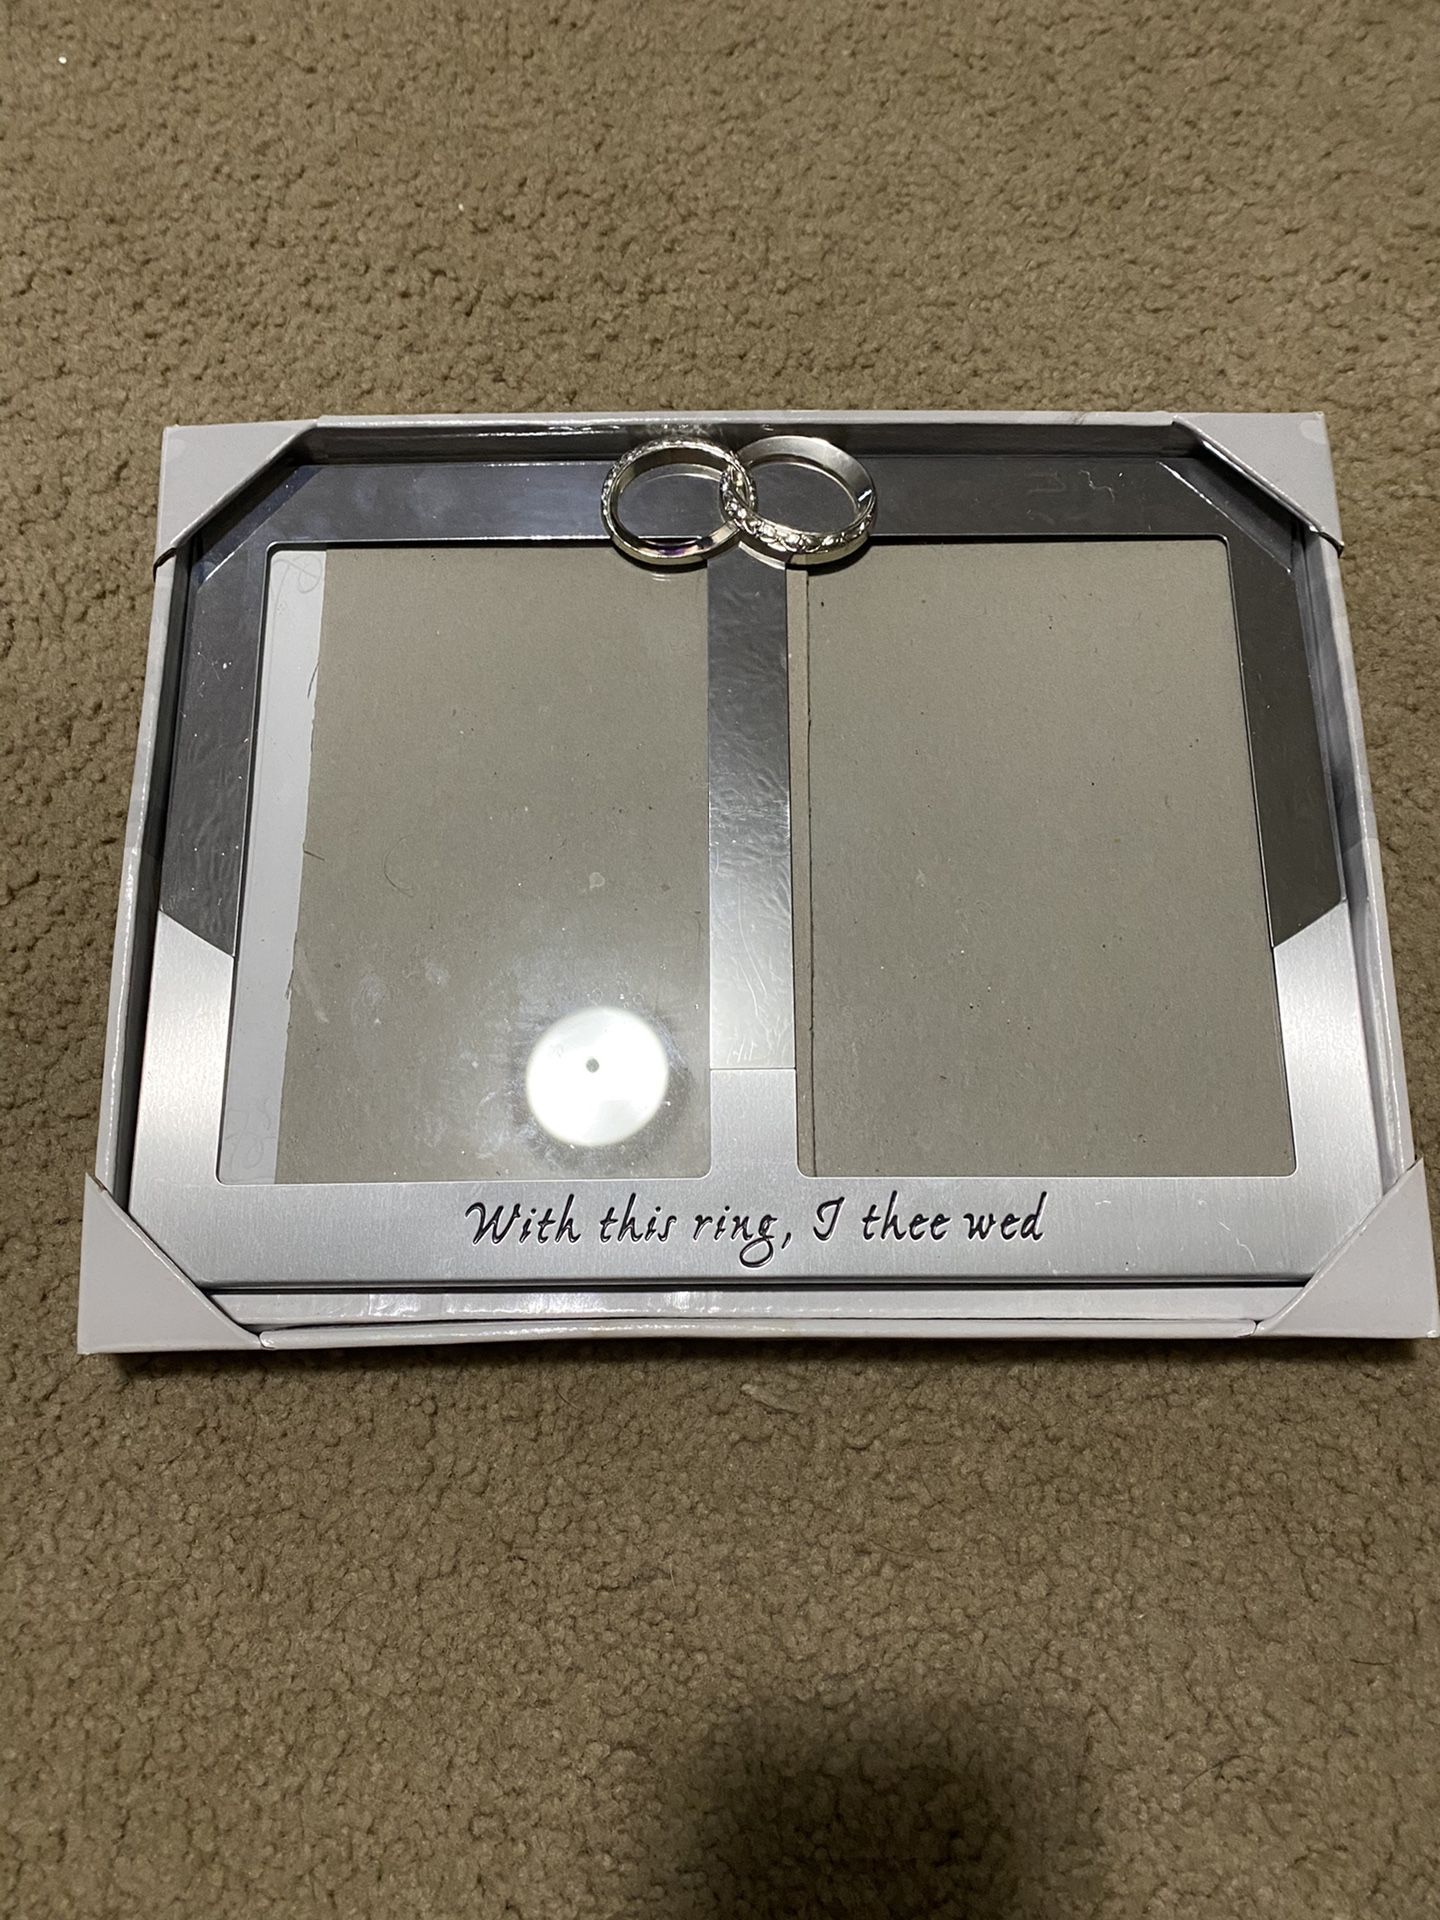 With this ring I thee wed picture frame